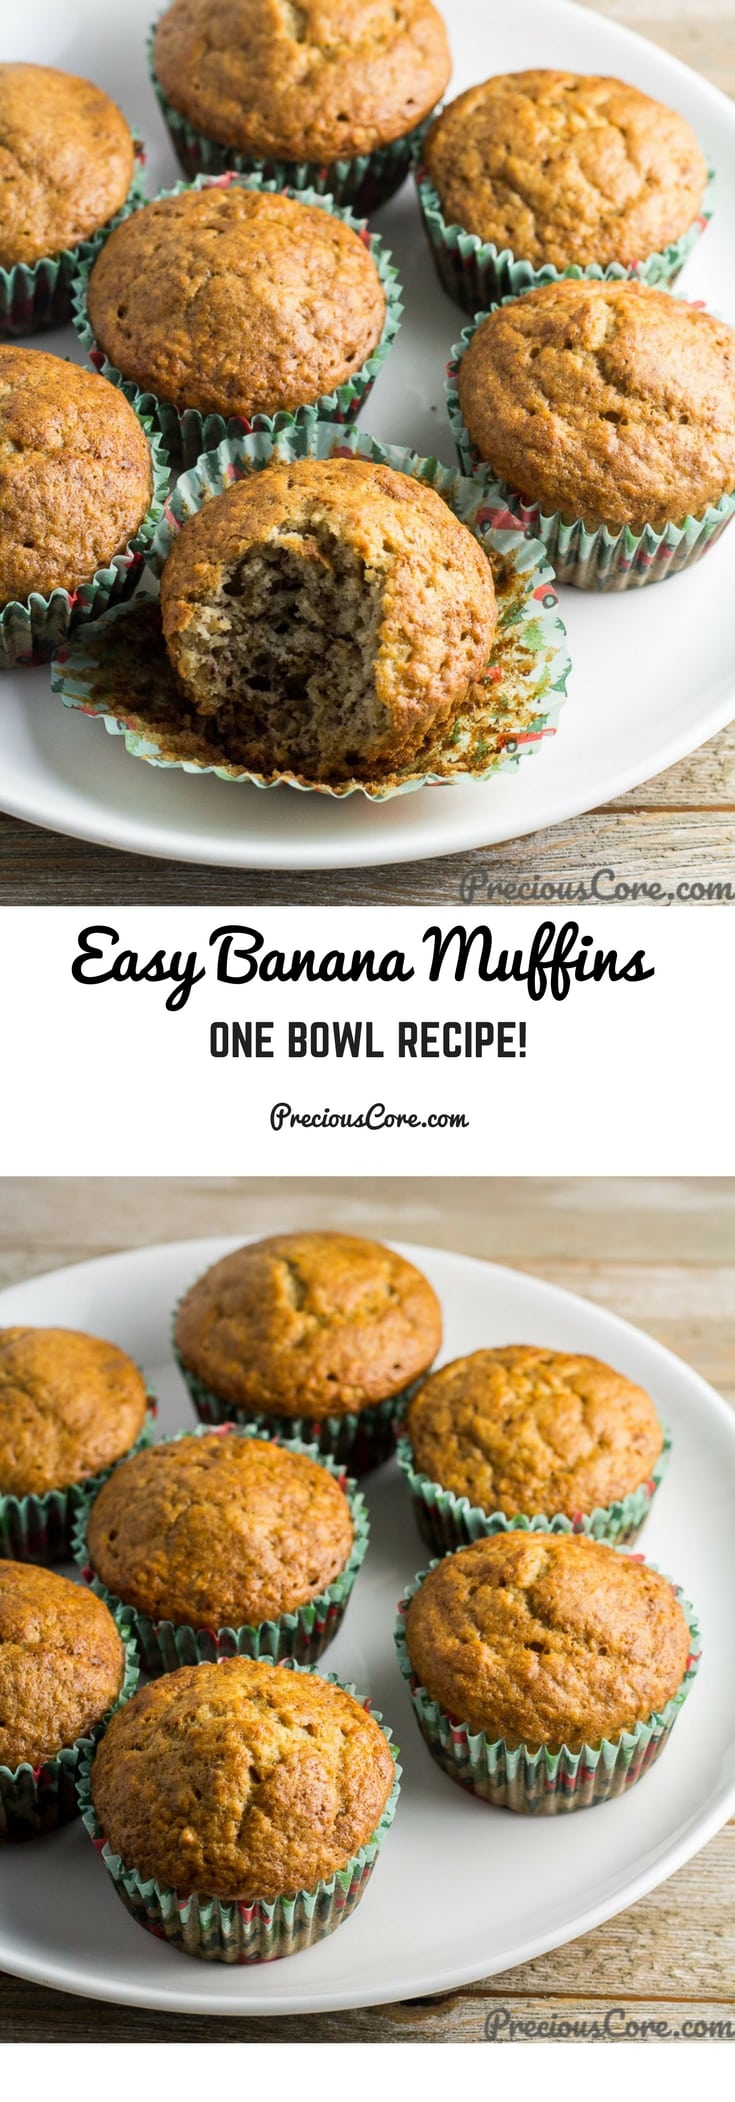 These banana muffins only require one bowl to make! They are great for breakfast, snacking or entertaining. Get the recipe on Precious Core. #breakfast #muffins #bananas #easyrecipes #baking